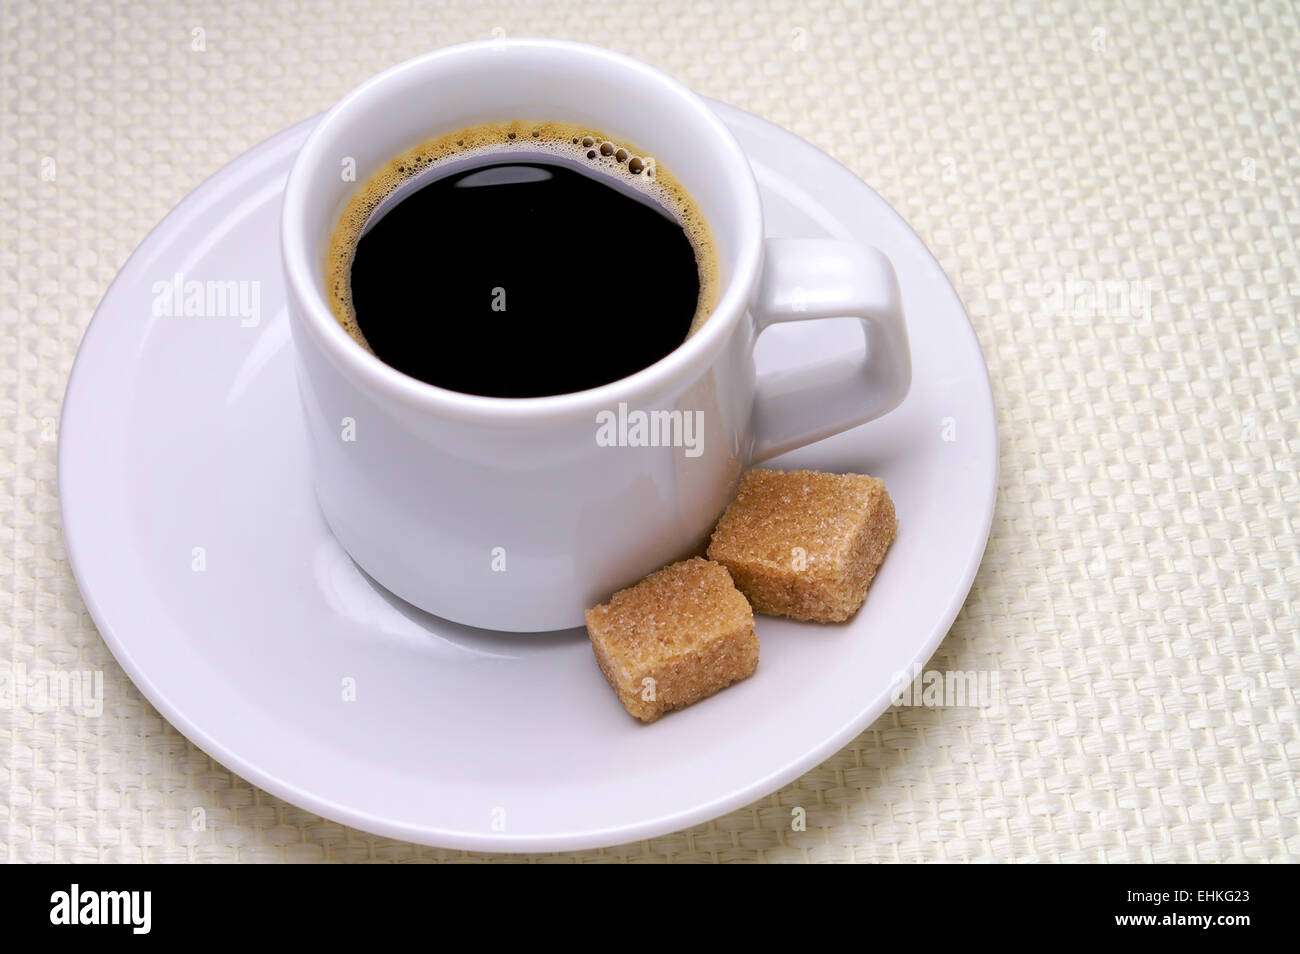 Coffee cup on linen background with clipping path Stock Photo